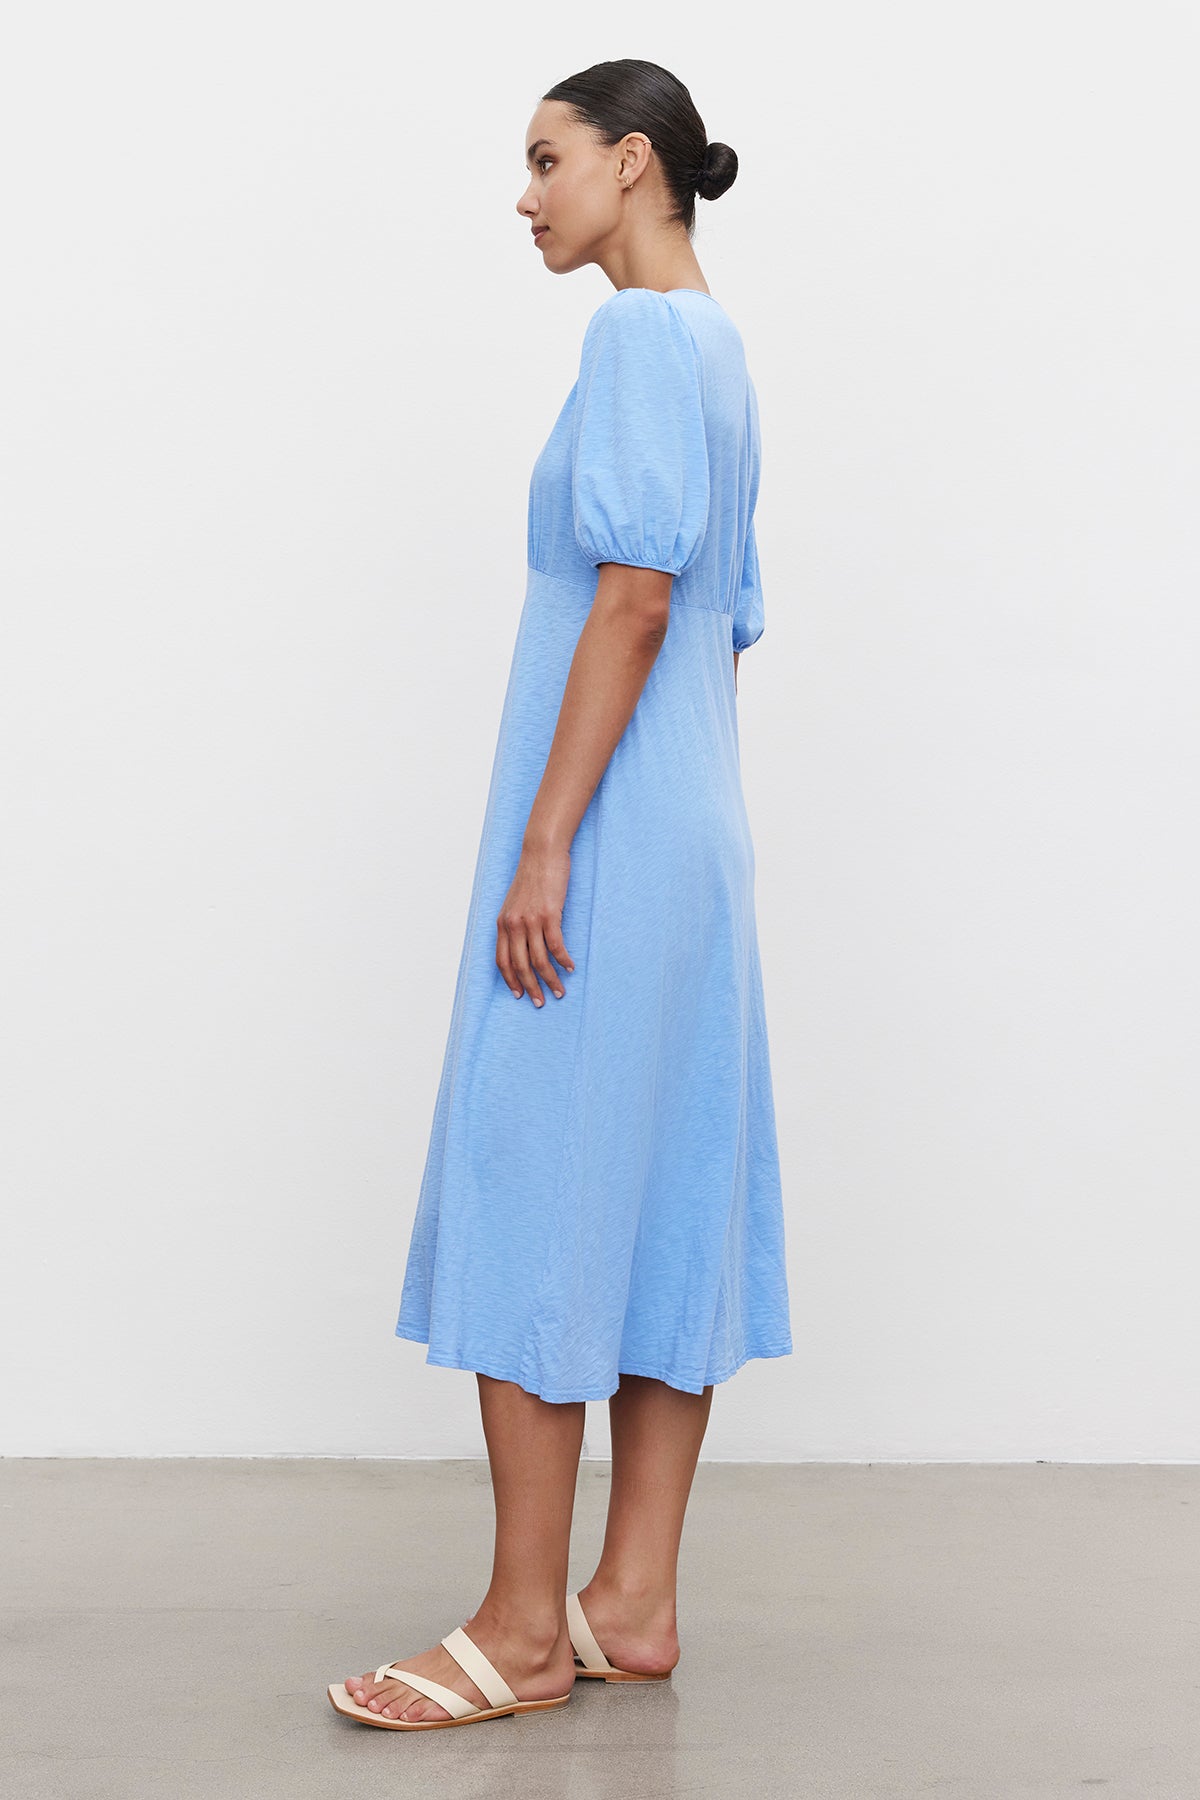 Woman in a blue Velvet by Graham & Spencer PARKER COTTON SLUB MIDI DRESS and beige sandals standing in profile against a white background.-36691474776257